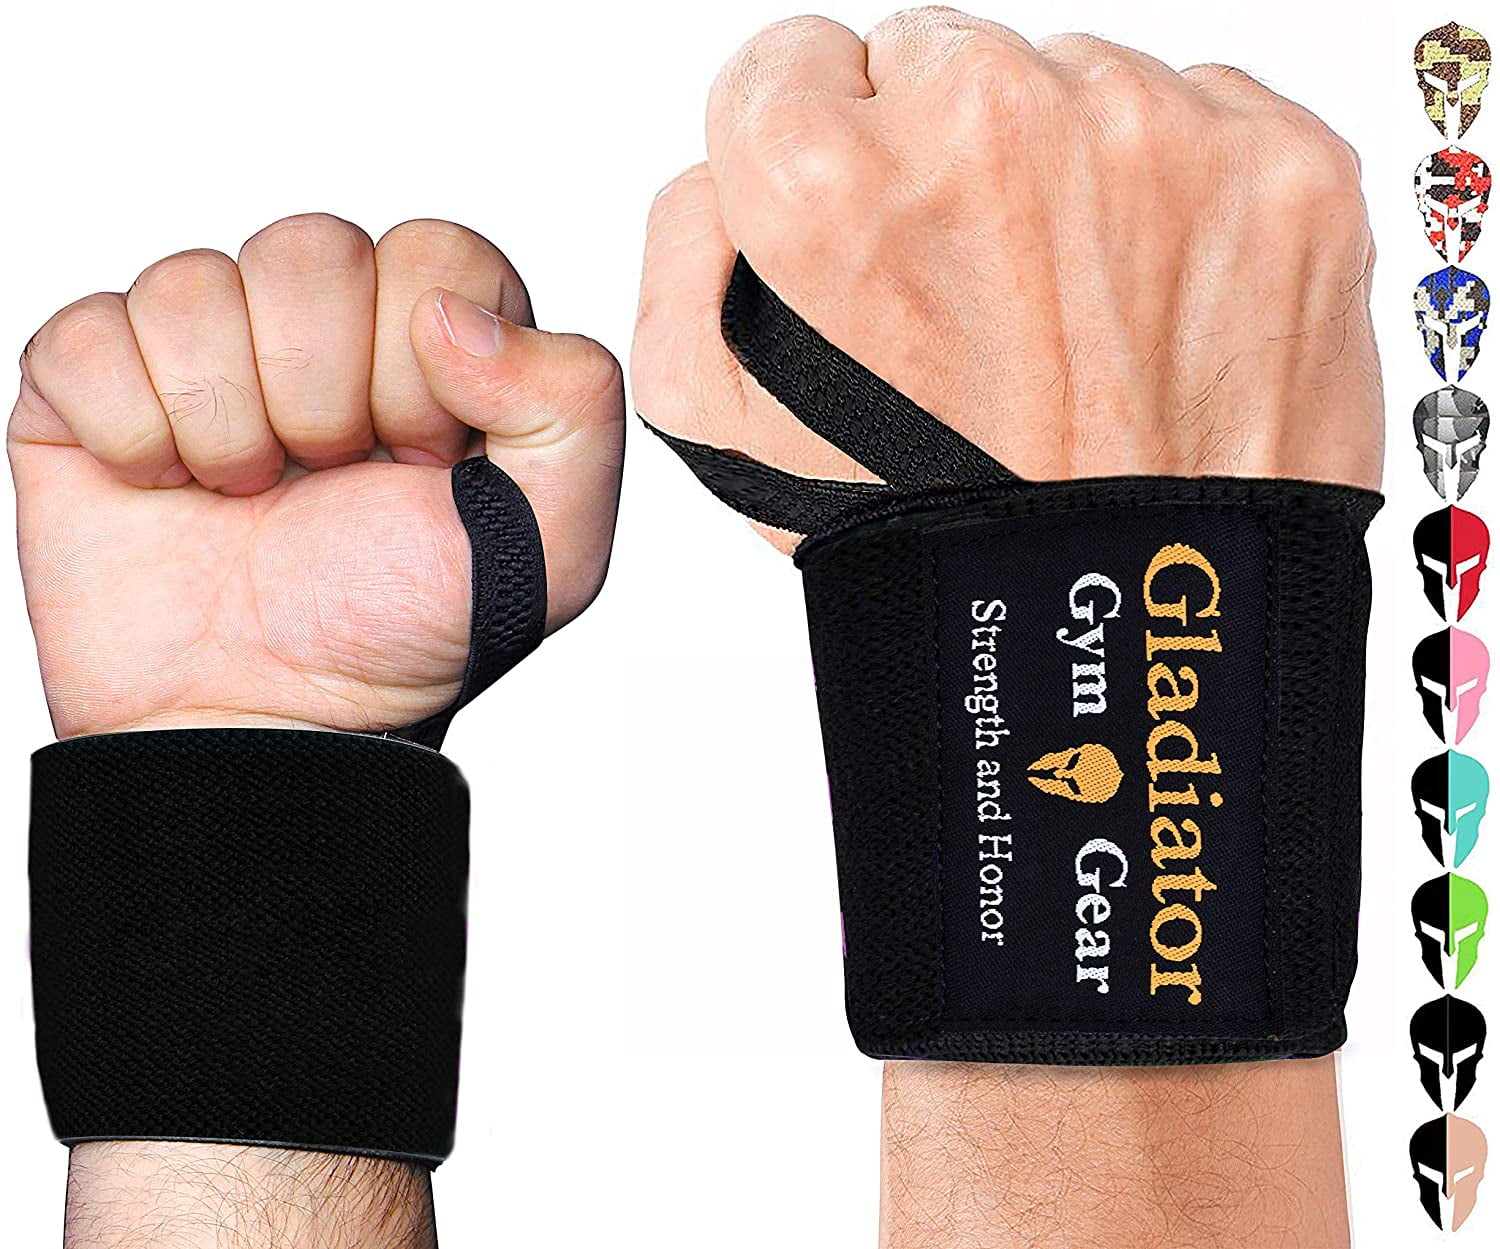 STING Elasticized Weightlifting Wrist Wraps for Bodybuilding and Crossfit Powerlifting 